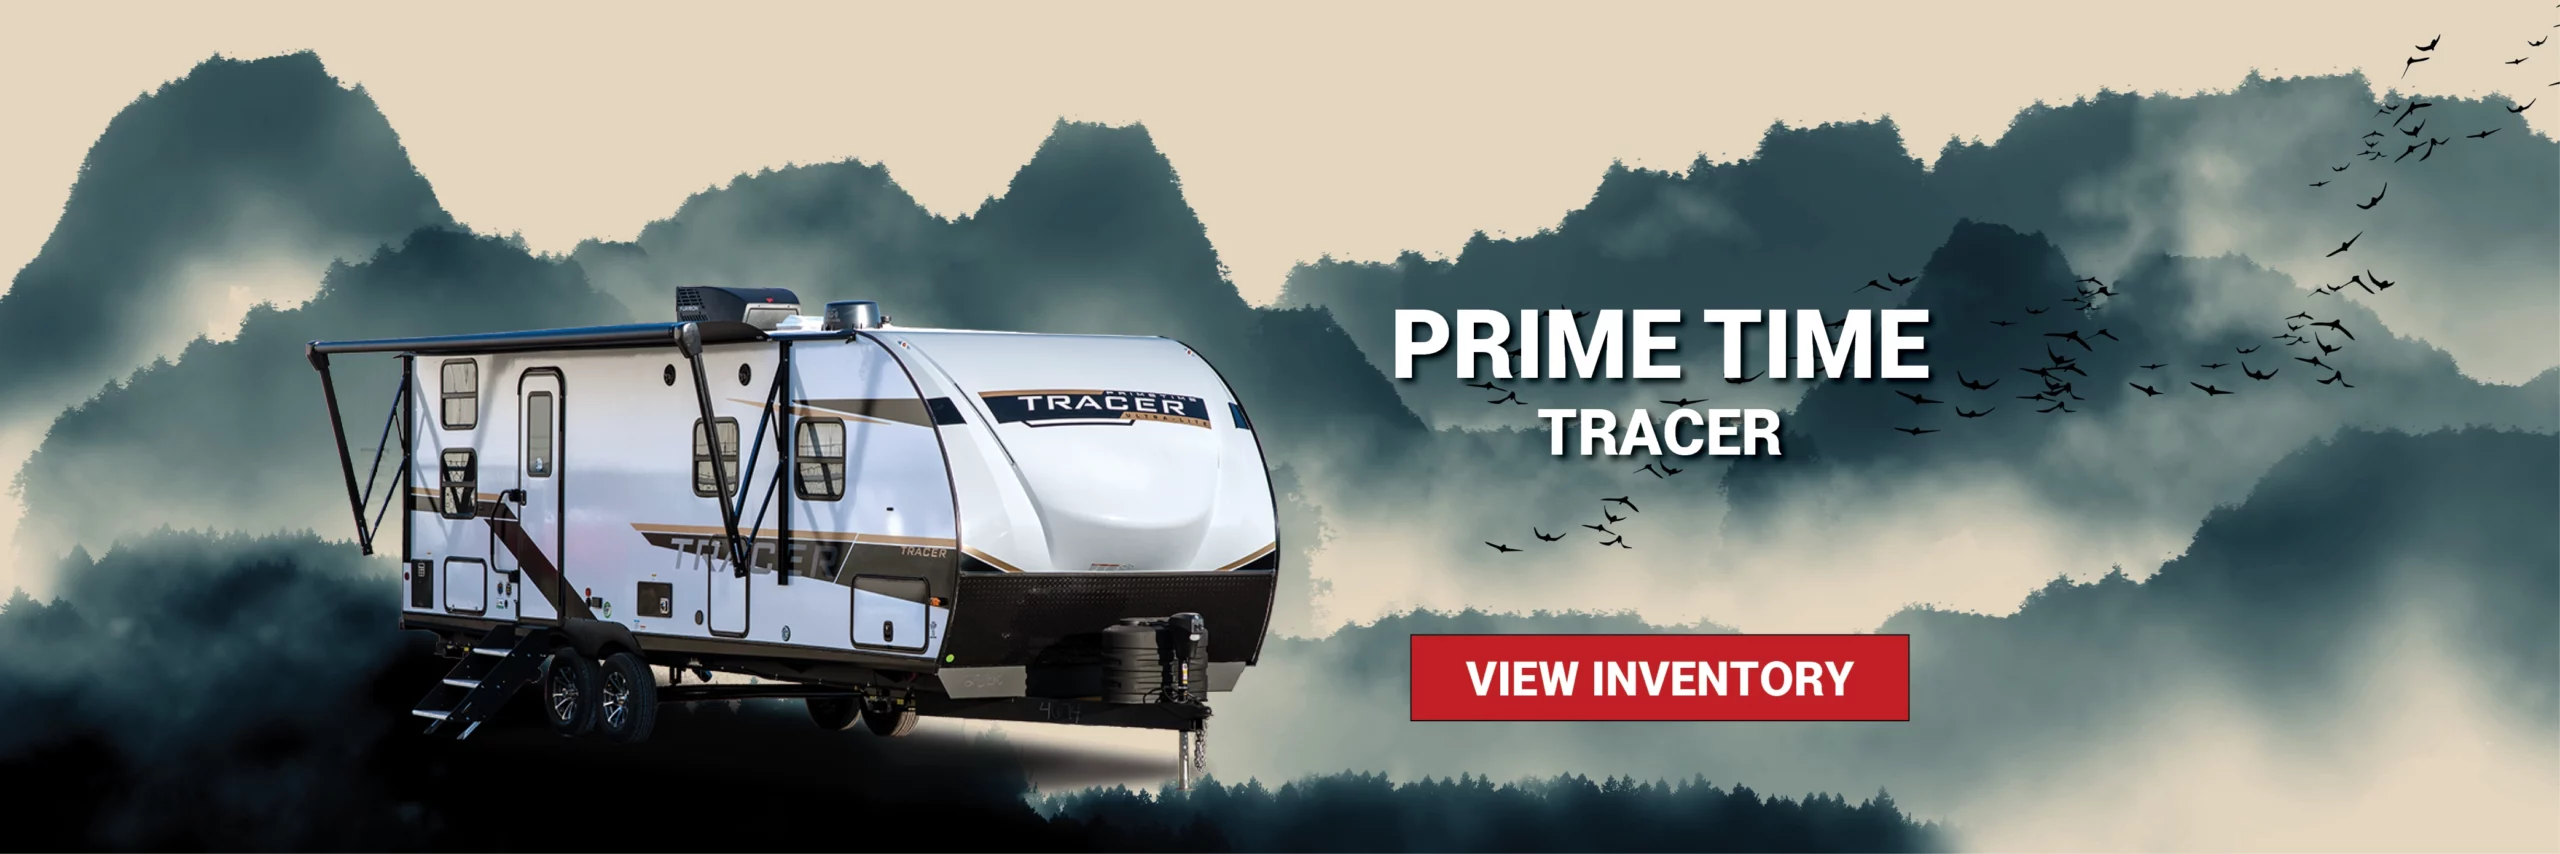 Prime Time Tracer - View Inventory